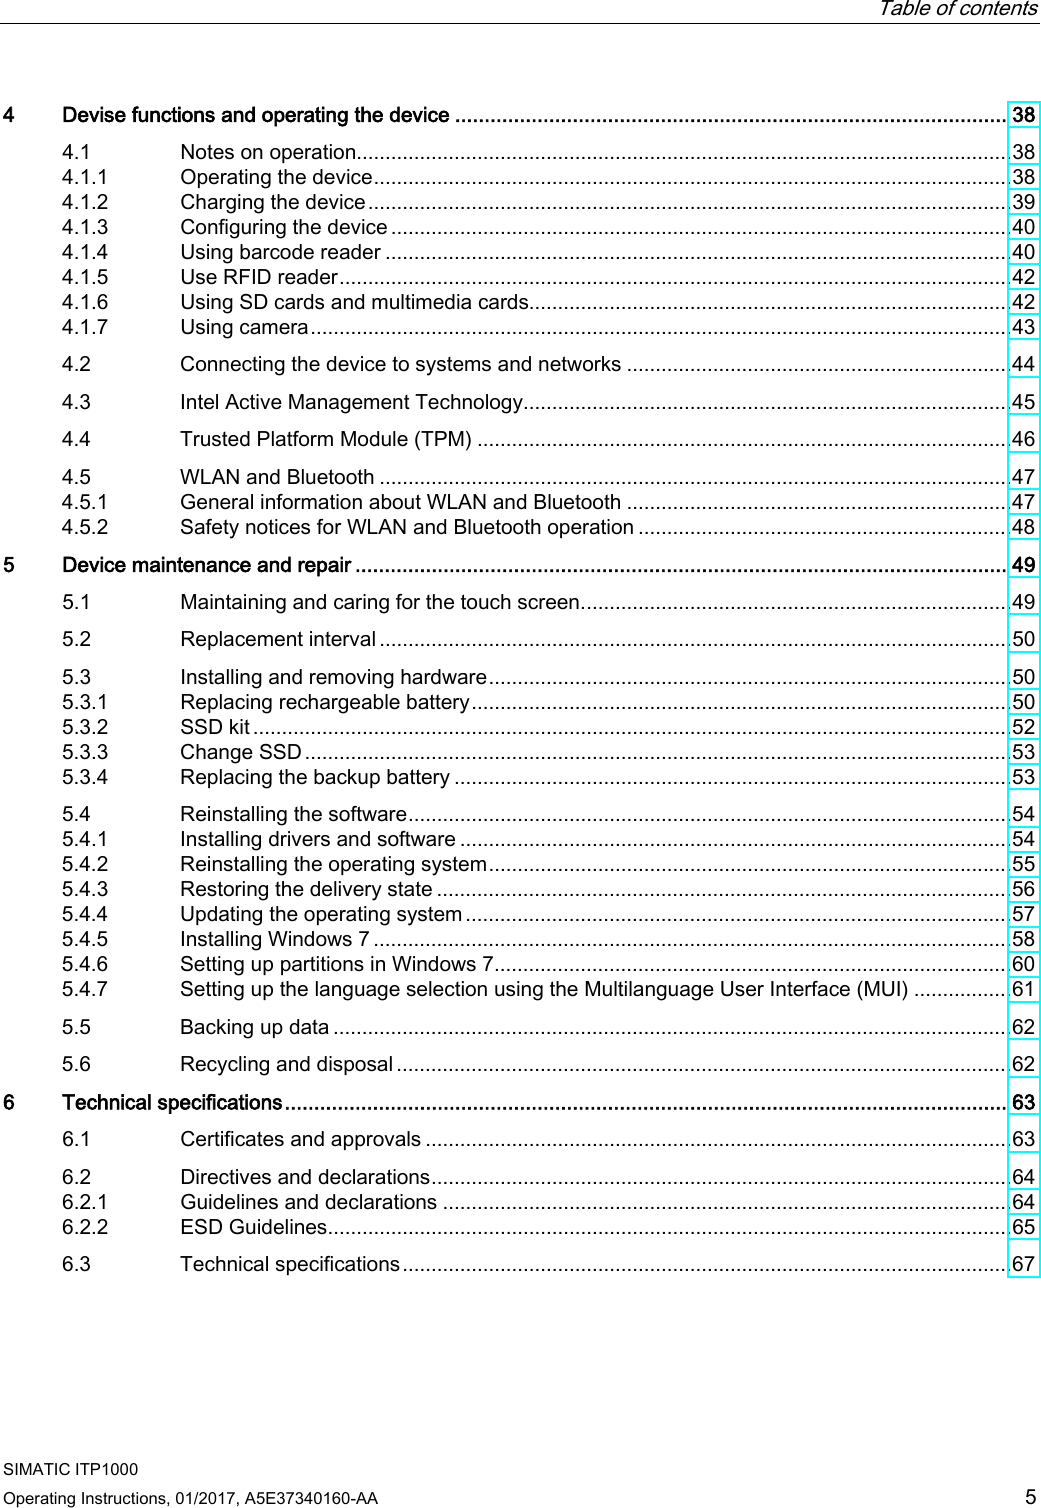  Table of contents  SIMATIC ITP1000 Operating Instructions, 01/2017, A5E37340160-AA  5 4  Devise functions and operating the device .............................................................................................. 38 4.1 Notes on operation .................................................................................................................. 38 4.1.1 Operating the device ............................................................................................................... 38 4.1.2 Charging the device ................................................................................................................ 39 4.1.3 Configuring the device ............................................................................................................ 40 4.1.4 Using barcode reader ............................................................................................................. 40 4.1.5 Use RFID reader ..................................................................................................................... 42 4.1.6 Using SD cards and multimedia cards.................................................................................... 42 4.1.7 Using camera .......................................................................................................................... 43 4.2 Connecting the device to systems and networks ................................................................... 44 4.3 Intel Active Management Technology ..................................................................................... 45 4.4 Trusted Platform Module (TPM) ............................................................................................. 46 4.5 WLAN and Bluetooth .............................................................................................................. 47 4.5.1 General information about WLAN and Bluetooth ................................................................... 47 4.5.2 Safety notices for WLAN and Bluetooth operation ................................................................. 48 5  Device maintenance and repair ............................................................................................................... 49 5.1 Maintaining and caring for the touch screen. .......................................................................... 49 5.2 Replacement interval .............................................................................................................. 50 5.3 Installing and removing hardware ........................................................................................... 50 5.3.1 Replacing rechargeable battery .............................................................................................. 50 5.3.2 SSD kit .................................................................................................................................... 52 5.3.3 Change SSD ........................................................................................................................... 53 5.3.4 Replacing the backup battery ................................................................................................. 53 5.4 Reinstalling the software ......................................................................................................... 54 5.4.1 Installing drivers and software ................................................................................................ 54 5.4.2 Reinstalling the operating system ........................................................................................... 55 5.4.3 Restoring the delivery state .................................................................................................... 56 5.4.4 Updating the operating system ............................................................................................... 57 5.4.5 Installing Windows 7 ............................................................................................................... 58 5.4.6 Setting up partitions in Windows 7 .......................................................................................... 60 5.4.7 Setting up the language selection using the Multilanguage User Interface (MUI) ................. 61 5.5 Backing up data ...................................................................................................................... 62 5.6 Recycling and disposal ........................................................................................................... 62 6  Technical specifications ........................................................................................................................... 63 6.1 Certificates and approvals ...................................................................................................... 63 6.2 Directives and declarations ..................................................................................................... 64 6.2.1 Guidelines and declarations ................................................................................................... 64 6.2.2 ESD Guidelines ....................................................................................................................... 65 6.3 Technical specifications .......................................................................................................... 67 